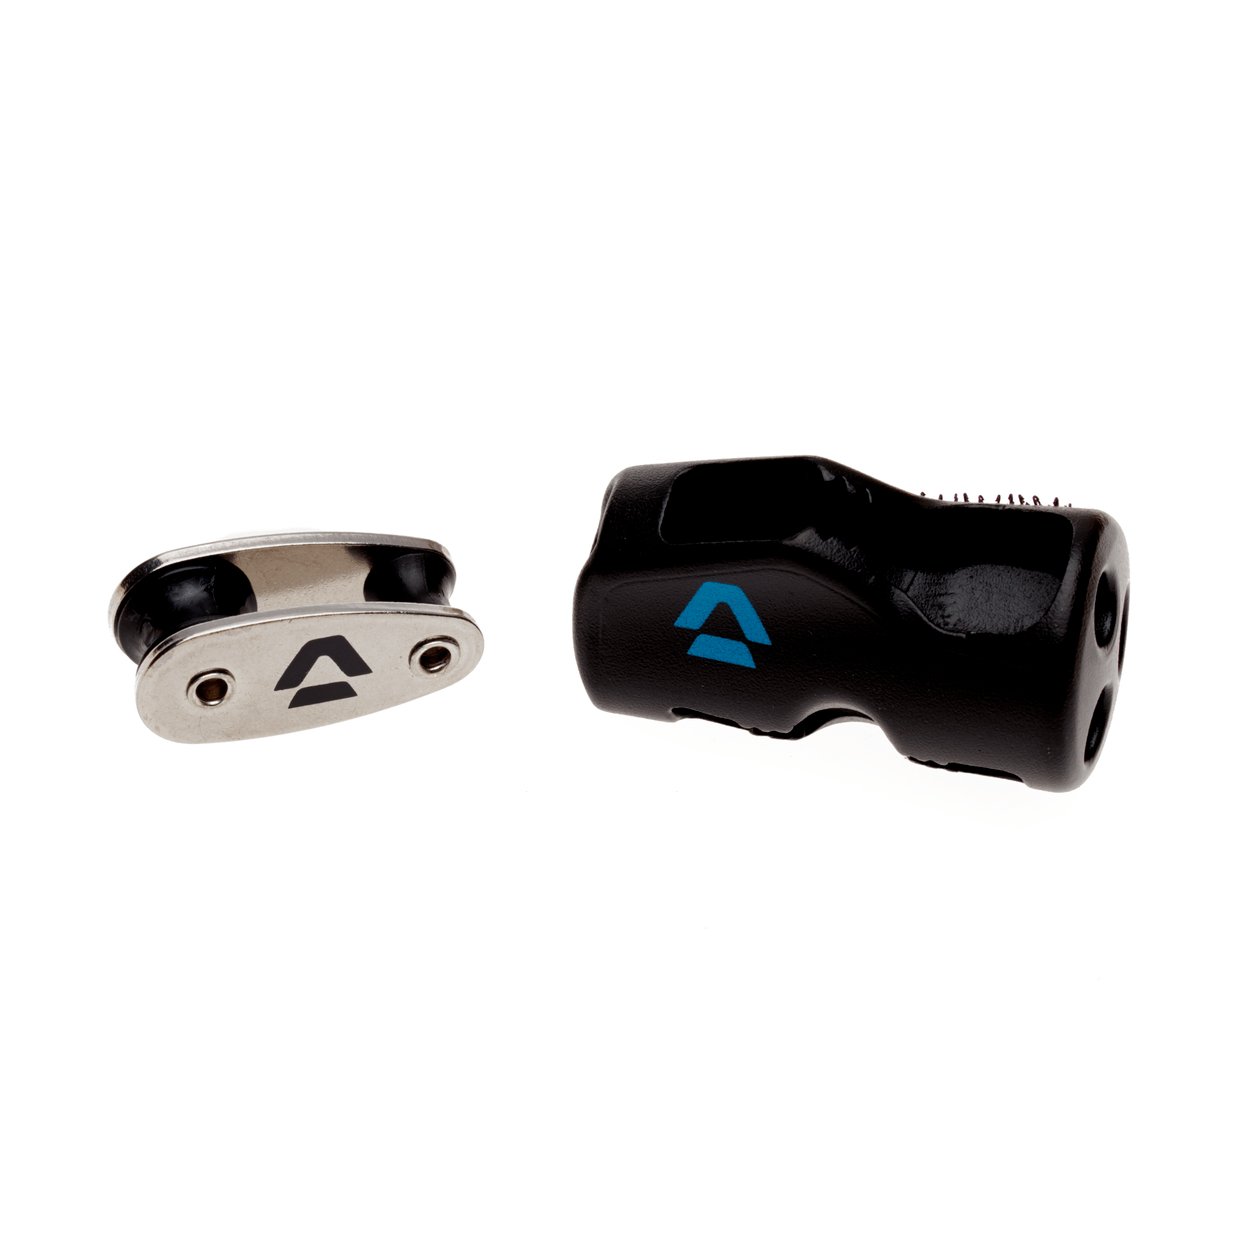 Duotone Vario Cleat & pulley (SS13-SS22) 2022 - Worthing Watersports - 9008415854370 - Spareparts - Duotone Kiteboarding